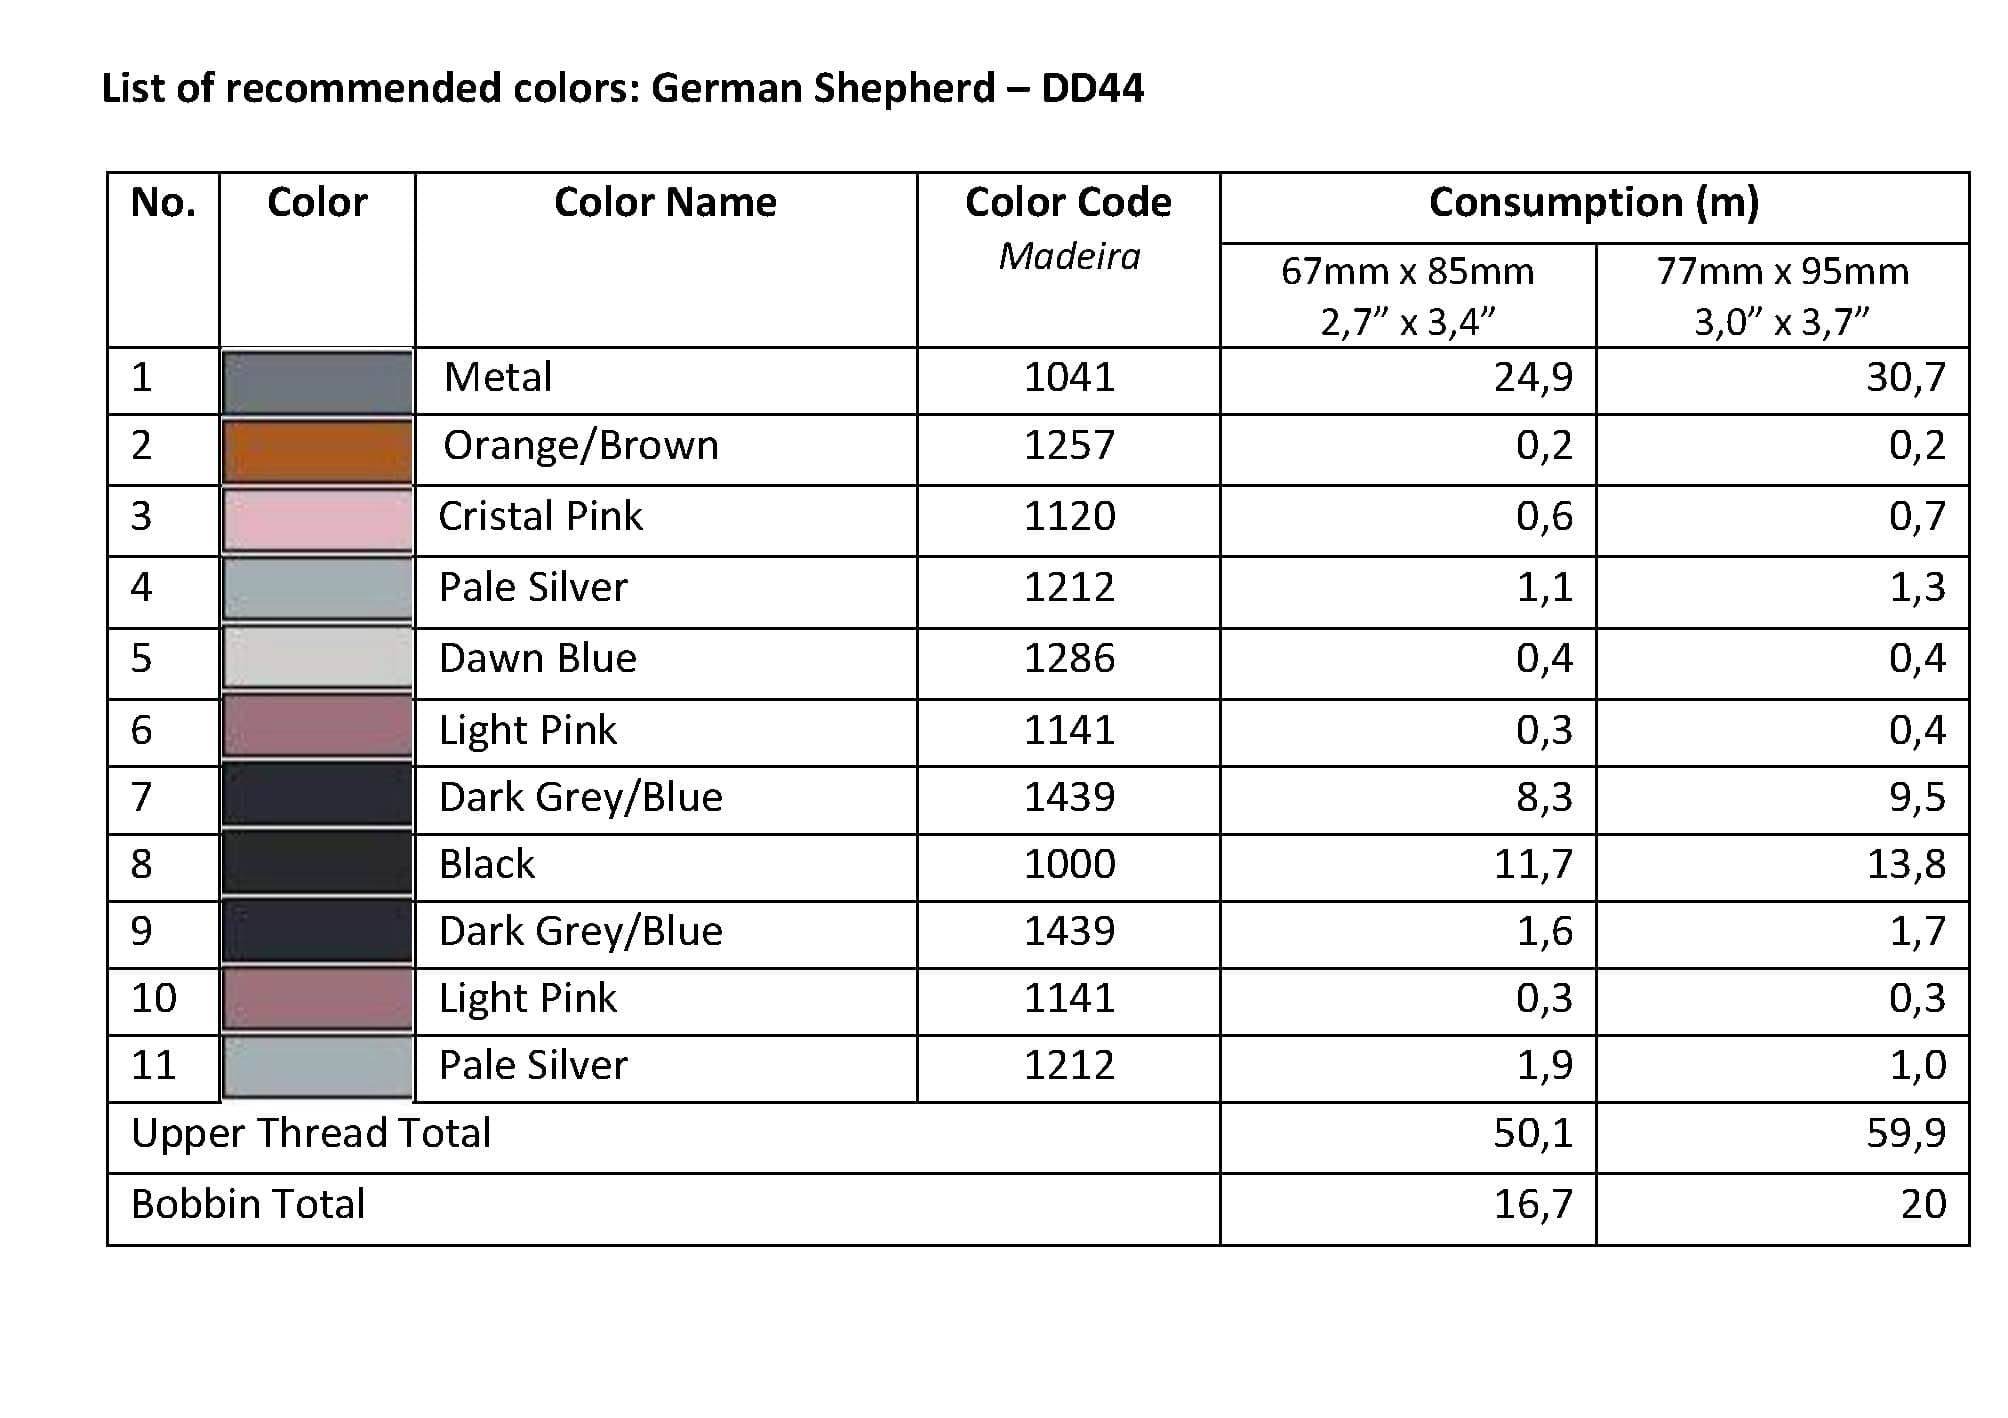 List of Recommended Colors - German Shepherd DD44